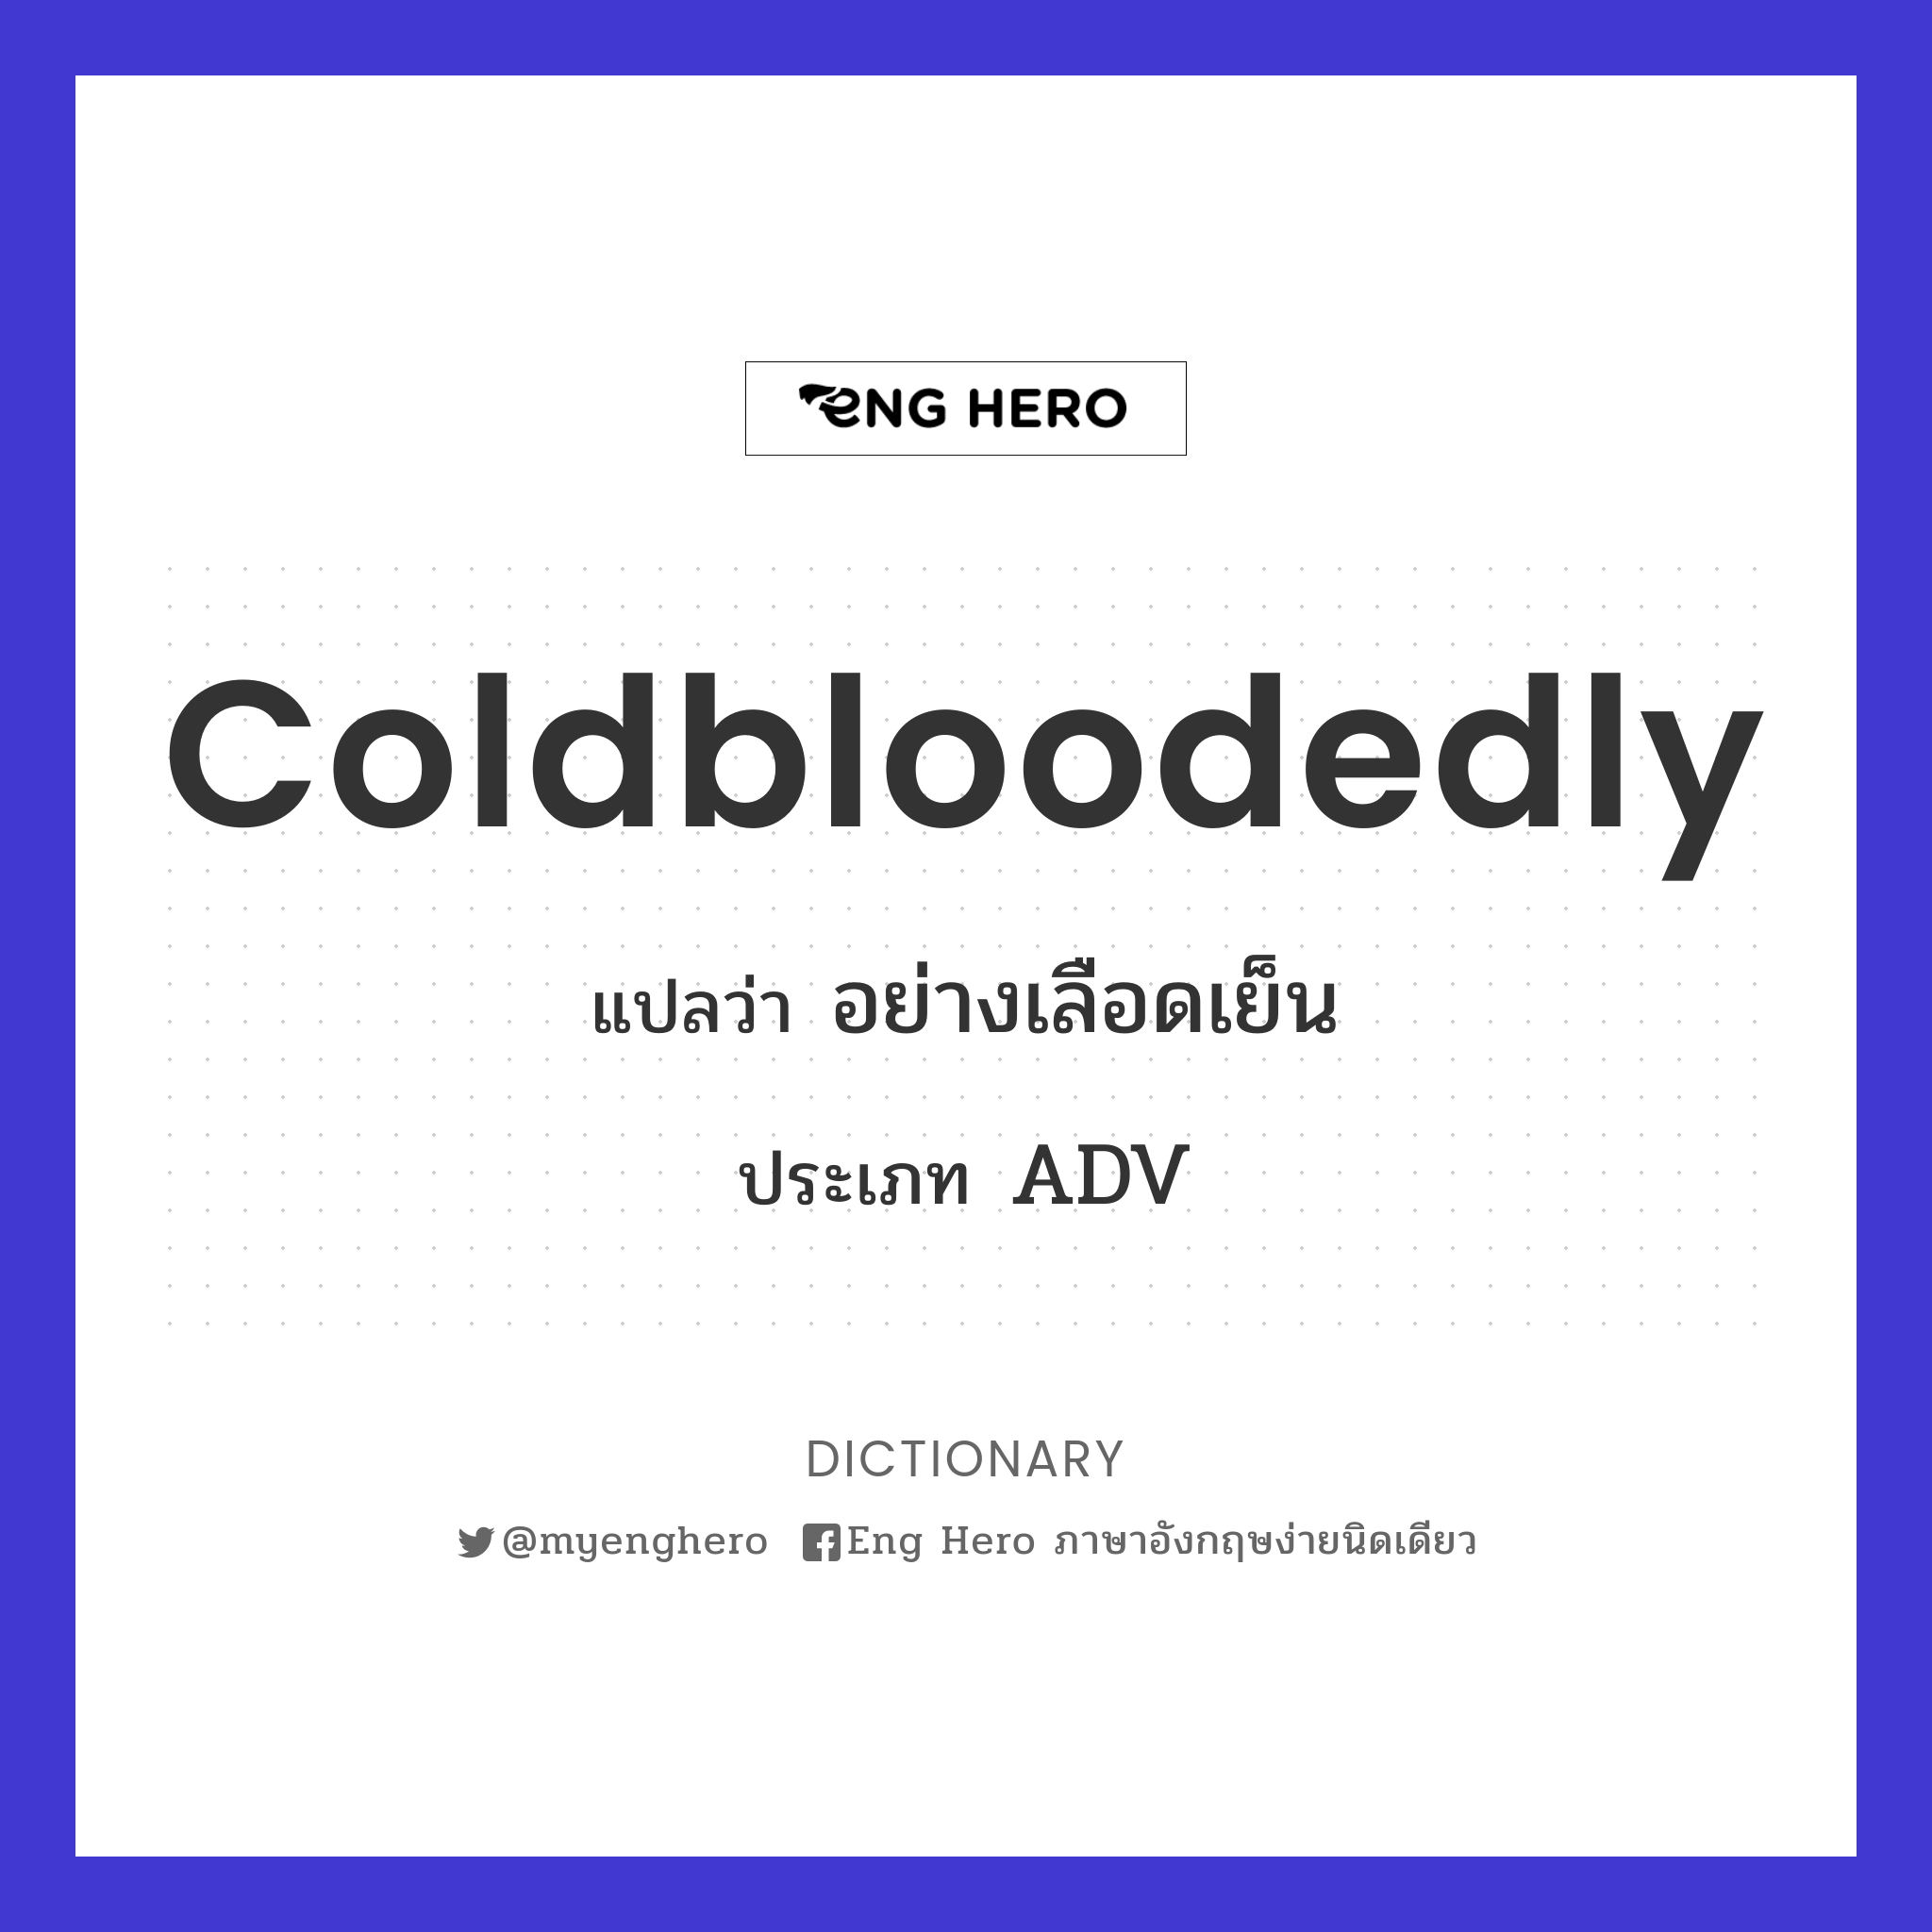 coldbloodedly